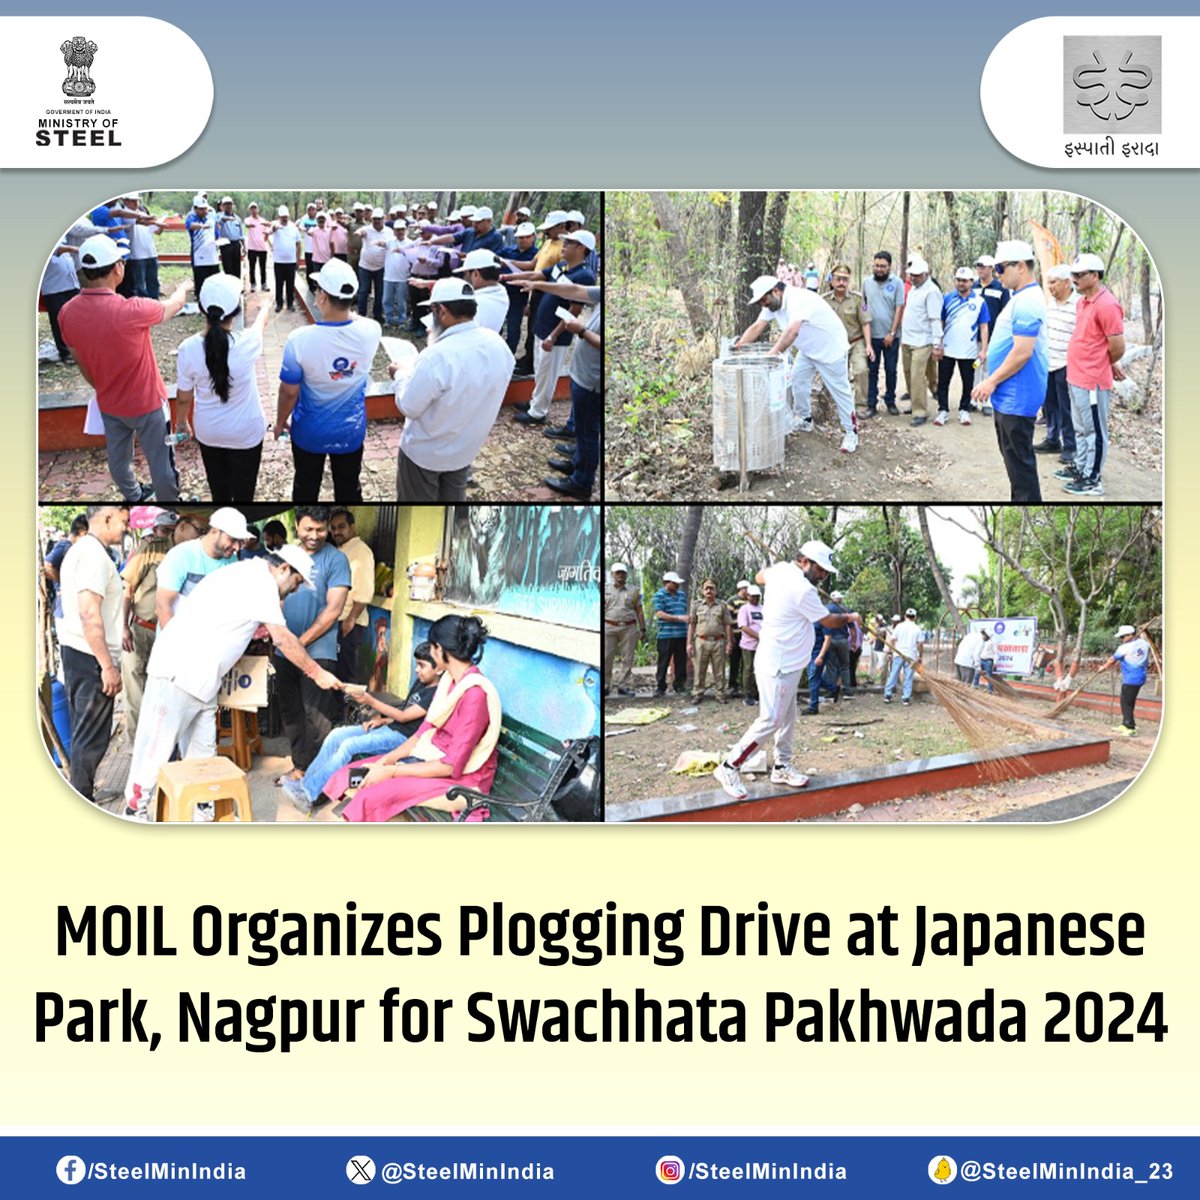 Shri Ajit Kumar Saxena, CMD #MOIL, leads a spirited #PloggingDrive at Japanese Park, Nagpur, during #SwachhataPakhwada2024. MOIL employees and Functional Directors actively participated in distributing jute bags to promote reducing plastic usage in nearby areas. #CleanIndia